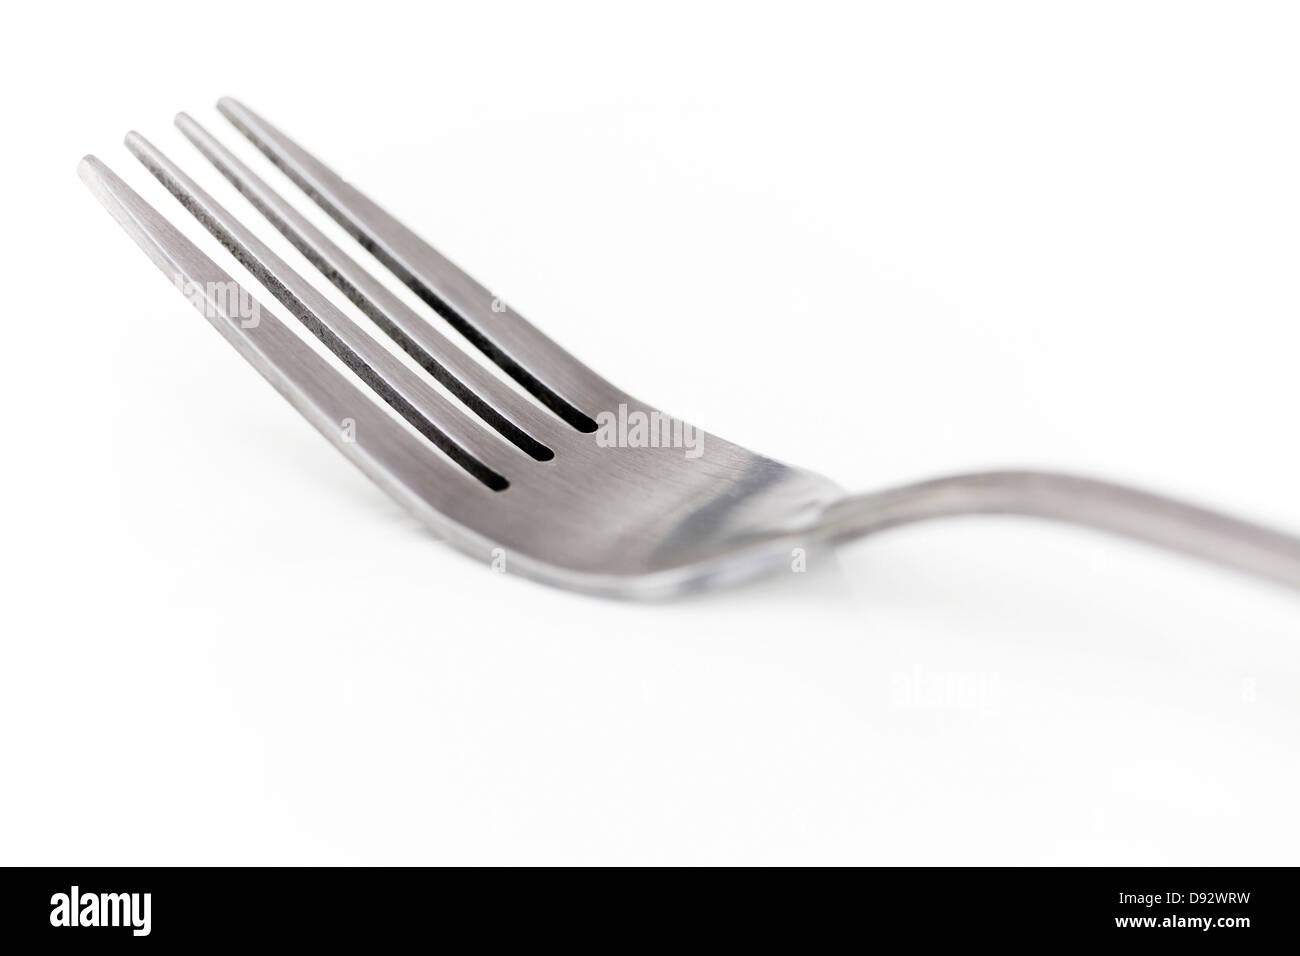 A clean stainless steel fork, close-up Stock Photo